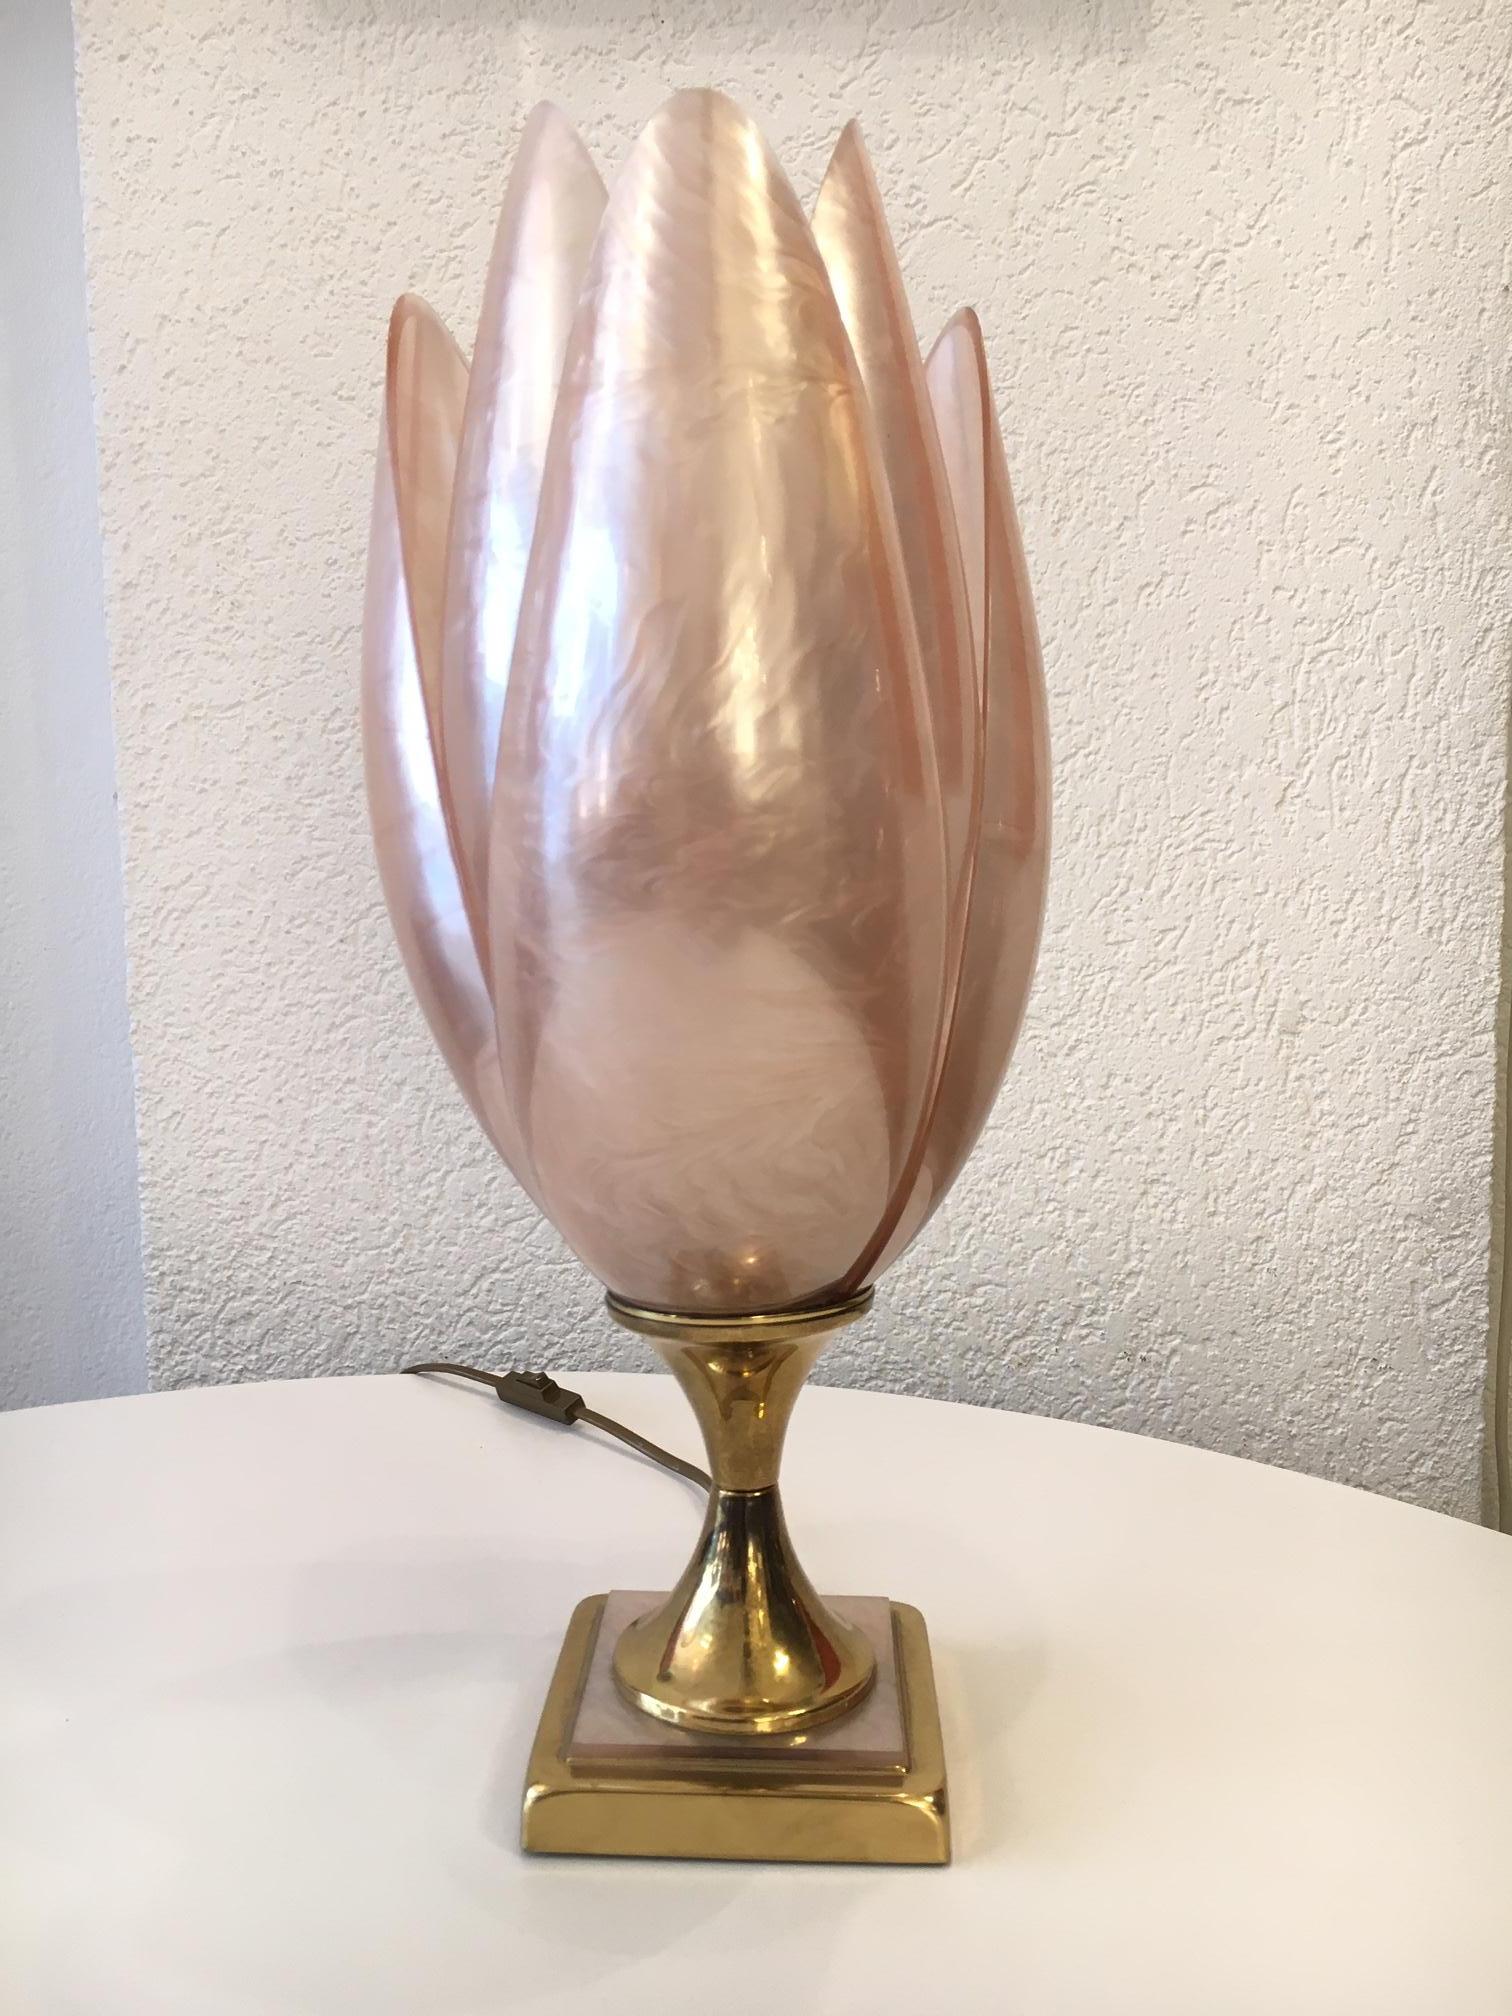 Lotus shaped table lamp by Rougier, Canada circa 1970
6 pink petals, brass base.